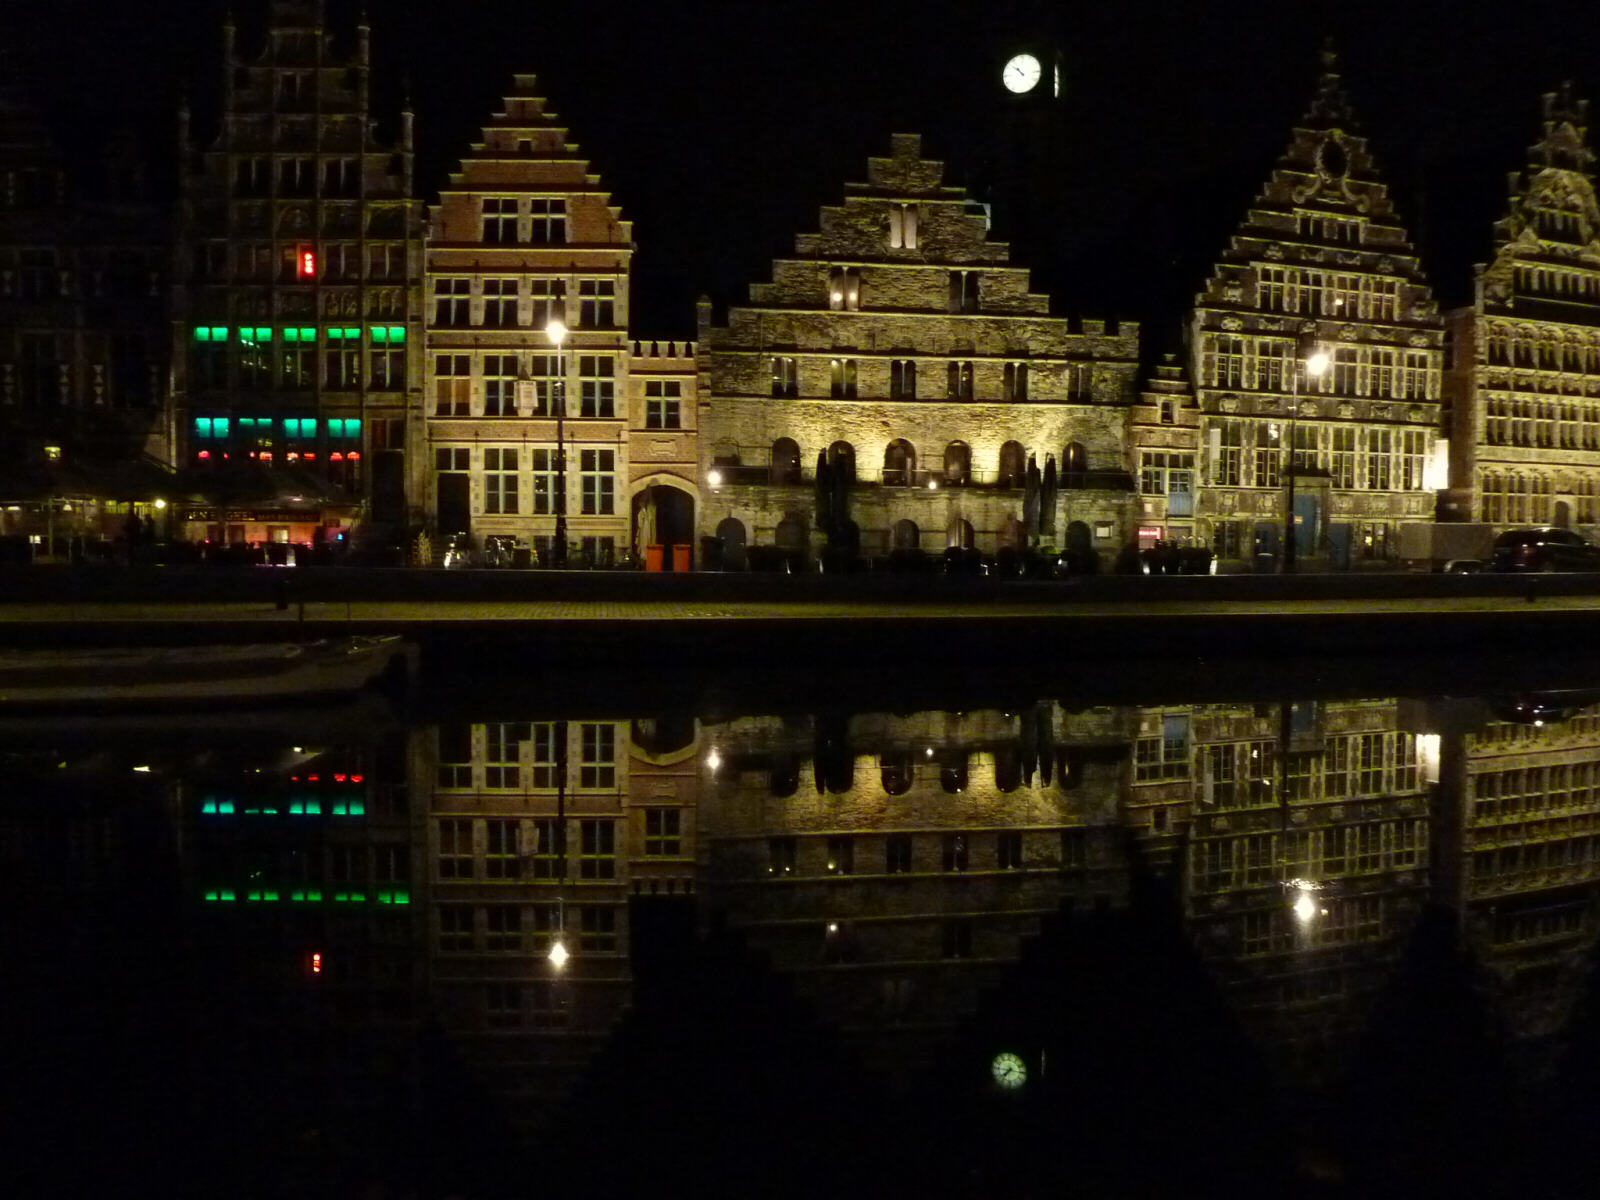 Nightime at the canalside in Ghent, Belgium